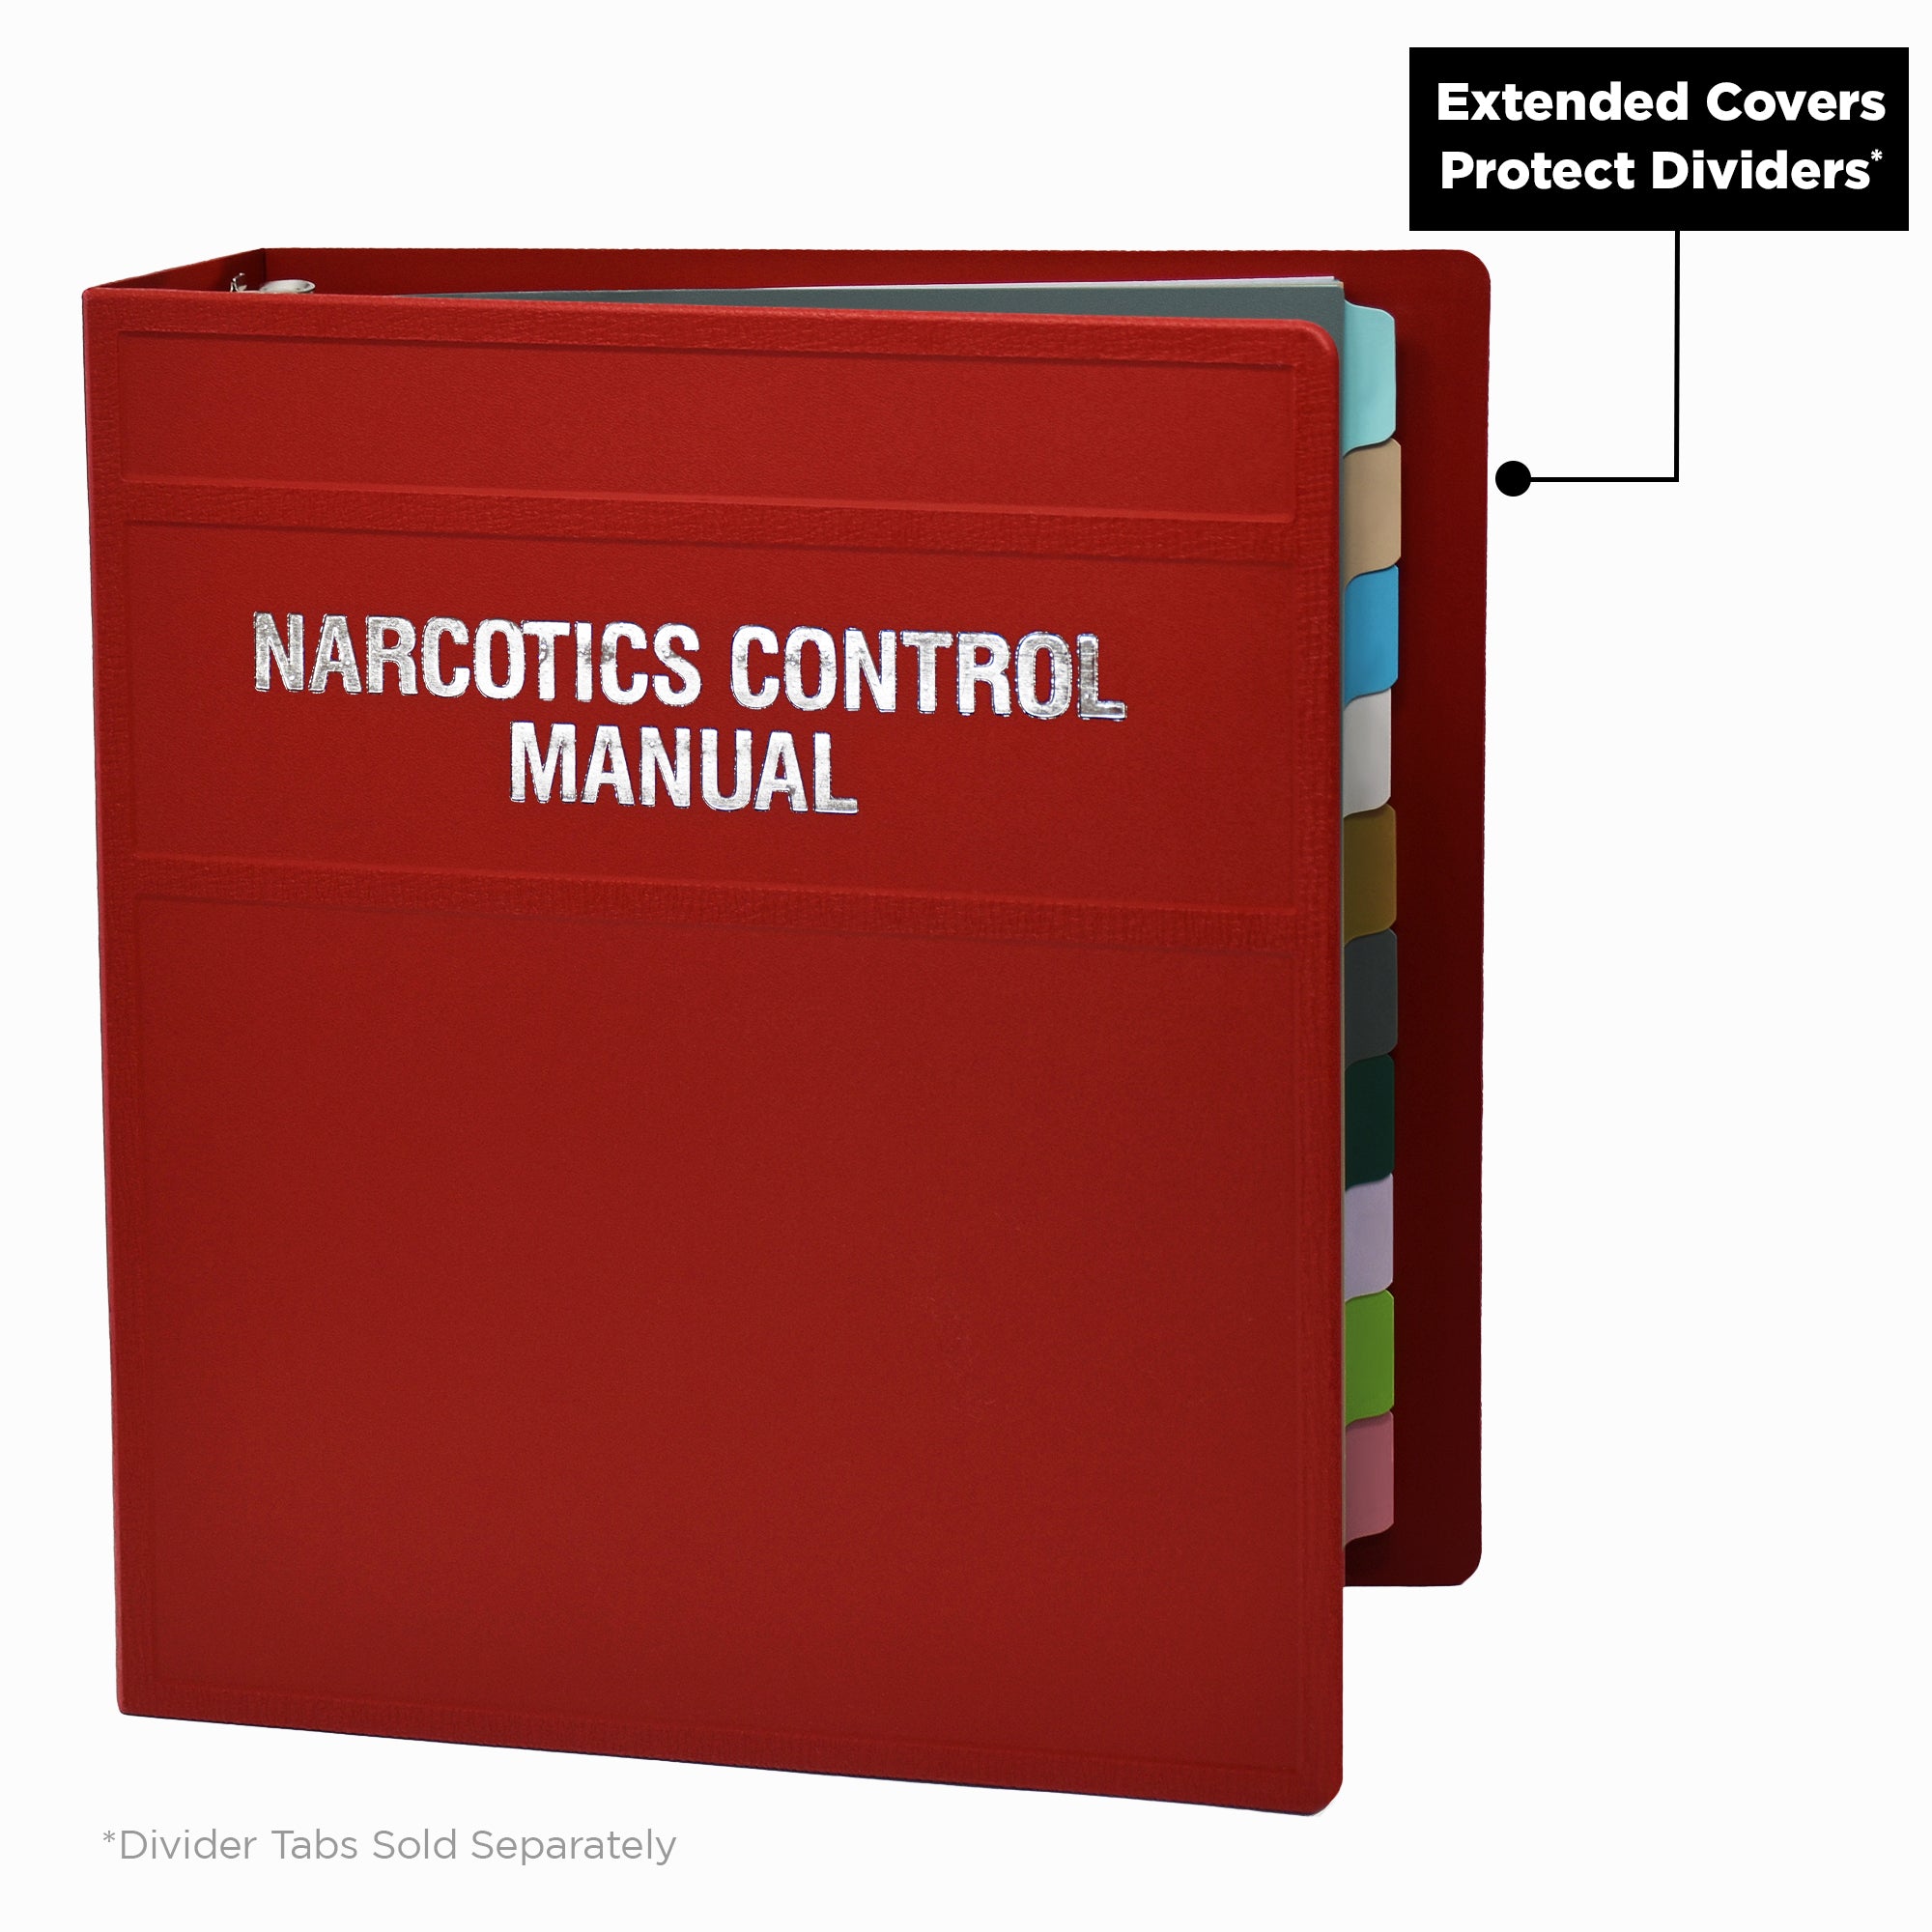 2-Inch Heavy Duty 3-Ring Binder for Narcotics Control Documents – Side Opening